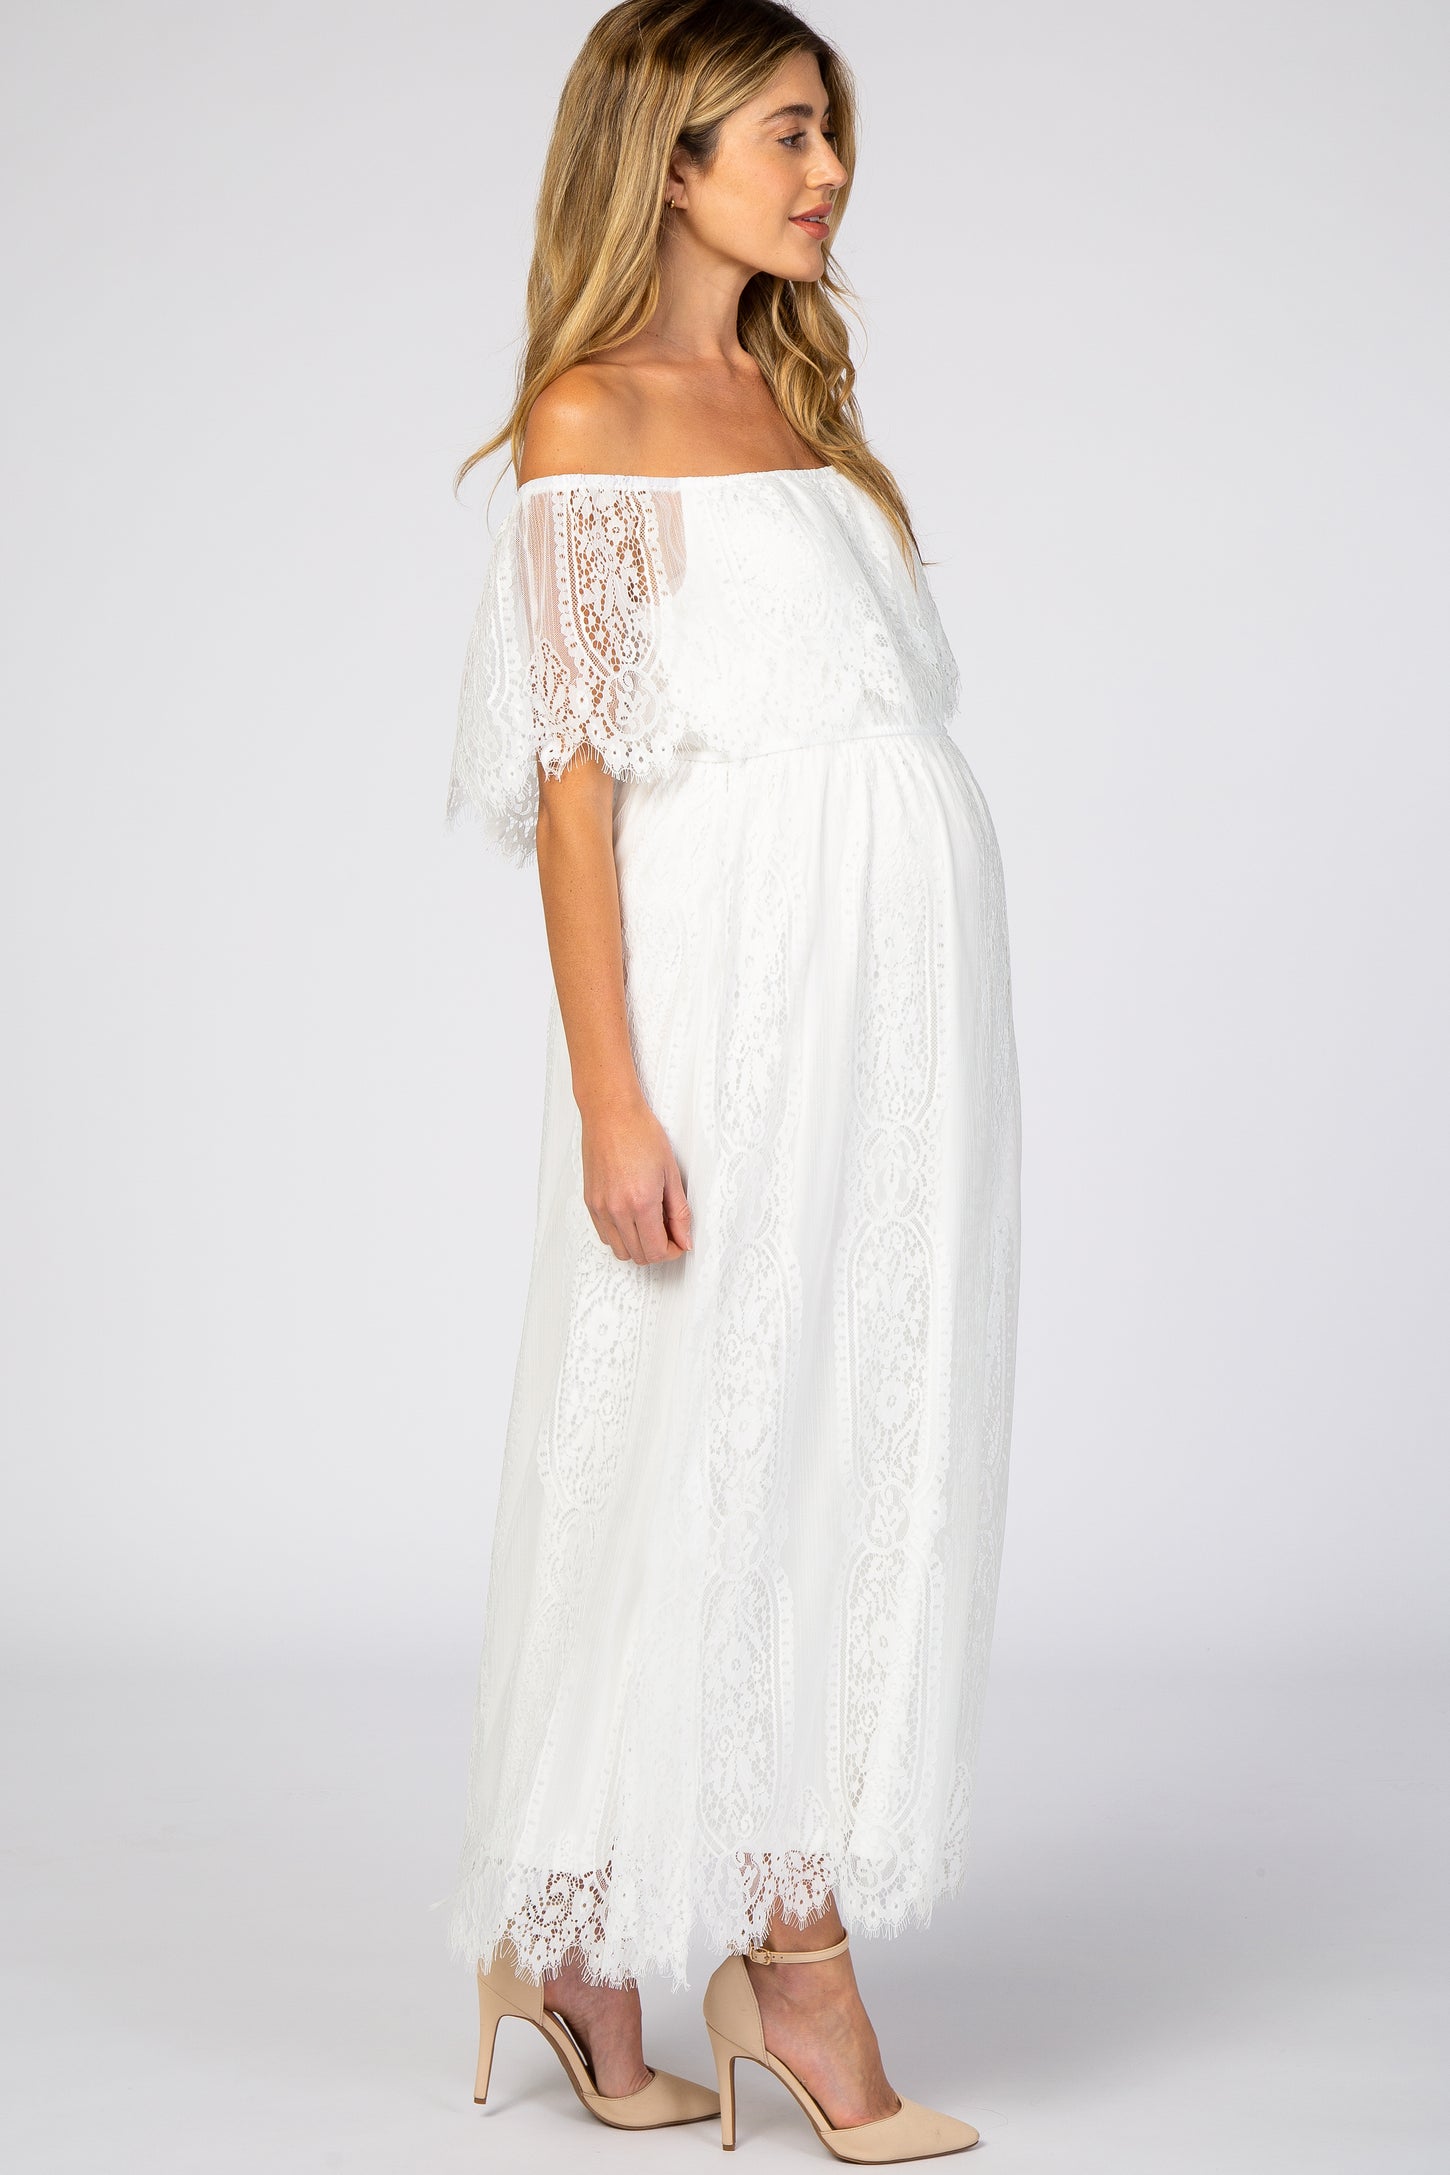 White Lace Off Shoulder Maternity Maxi Dress